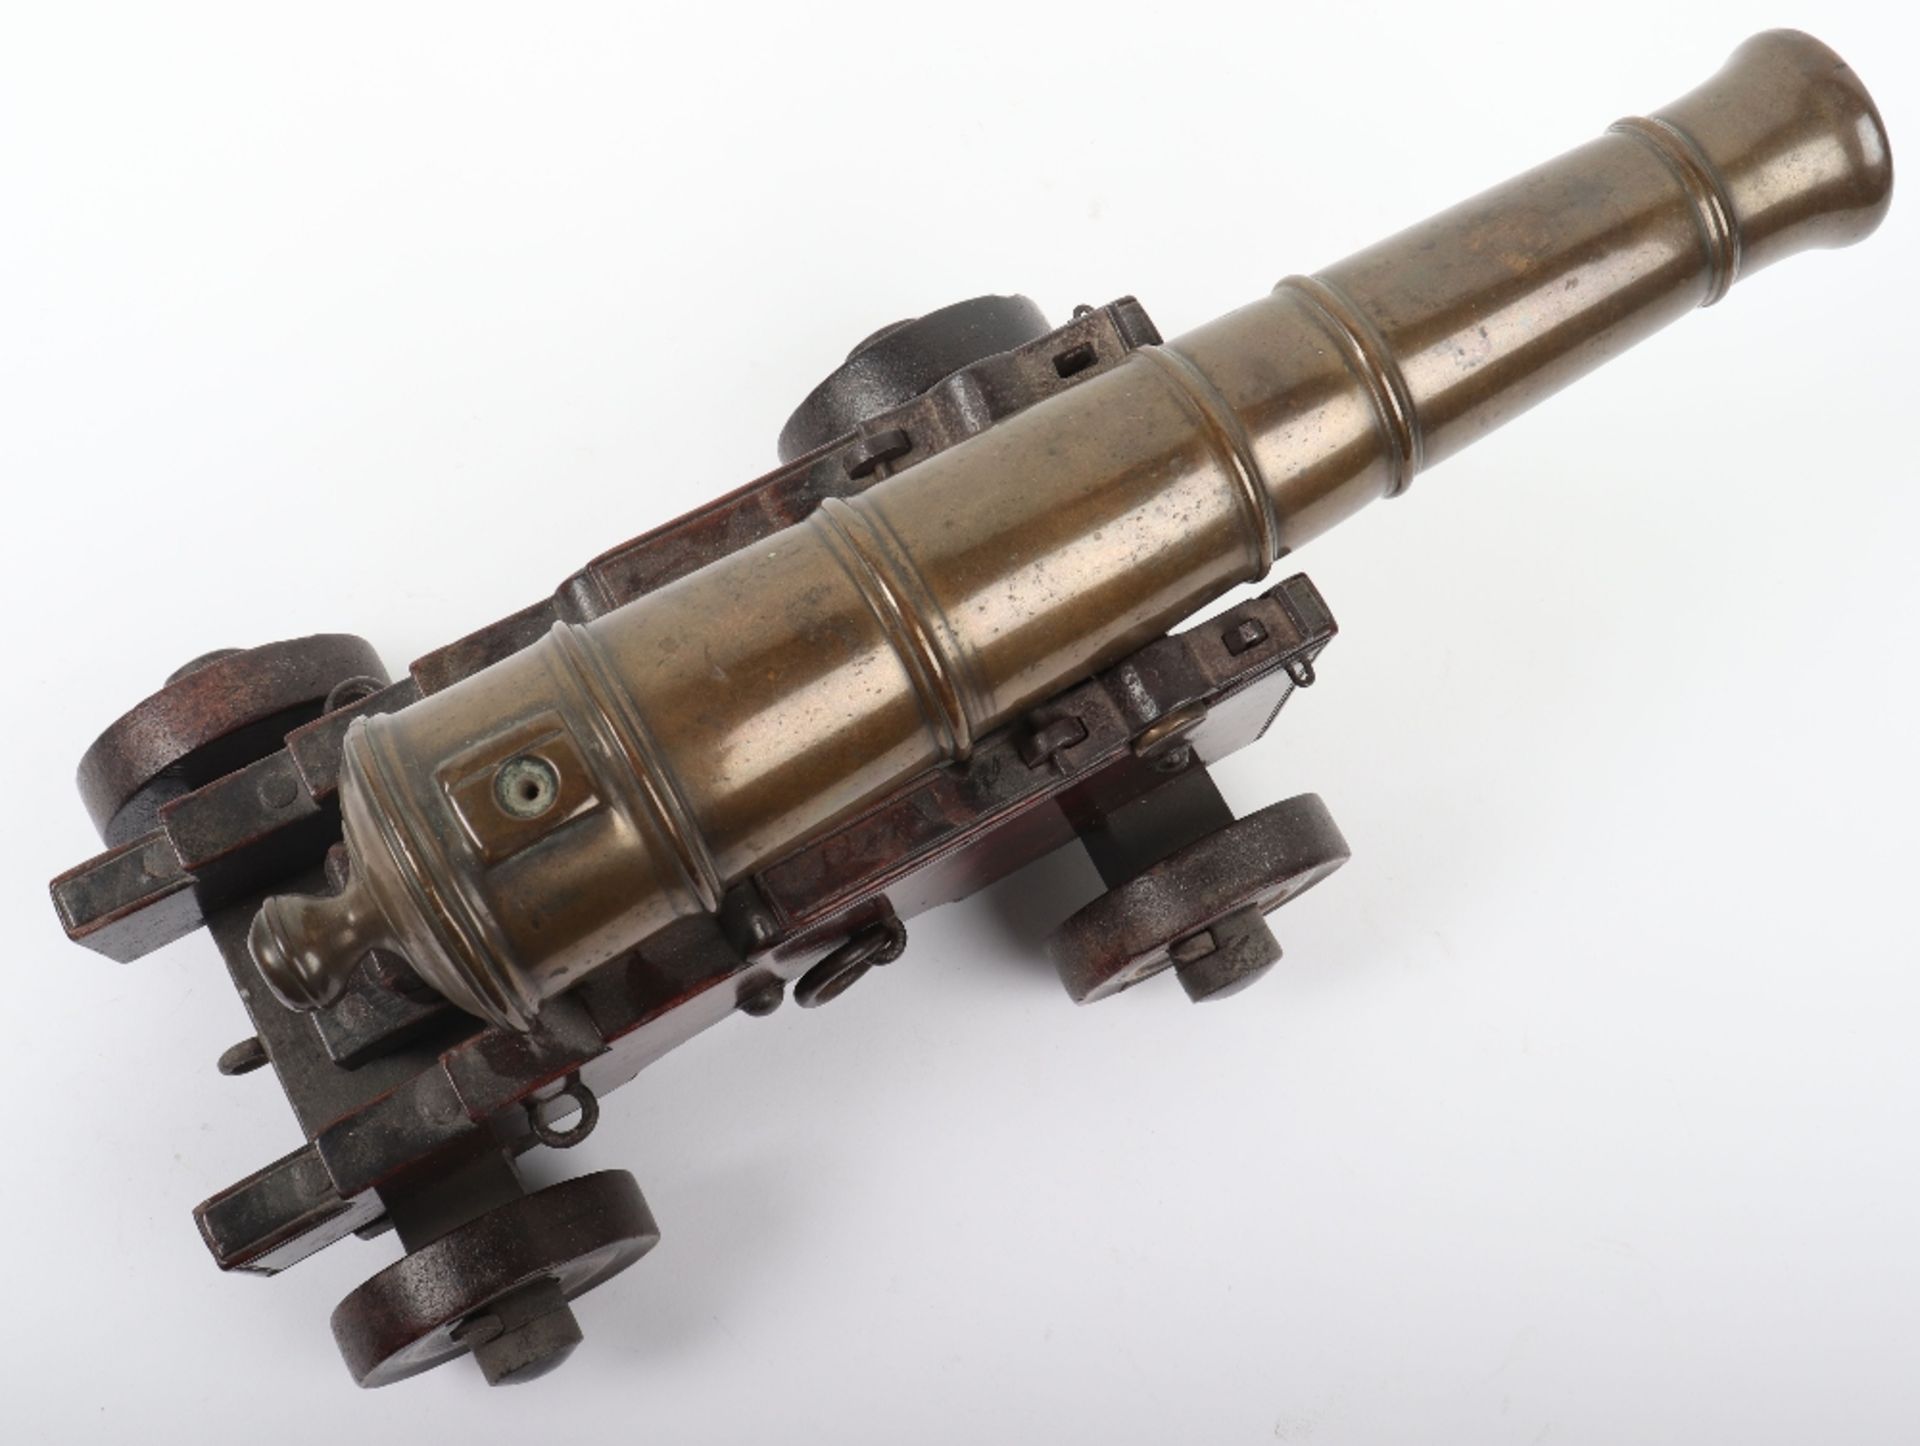 Contemporary Model of a Ships Cannon - Image 5 of 6